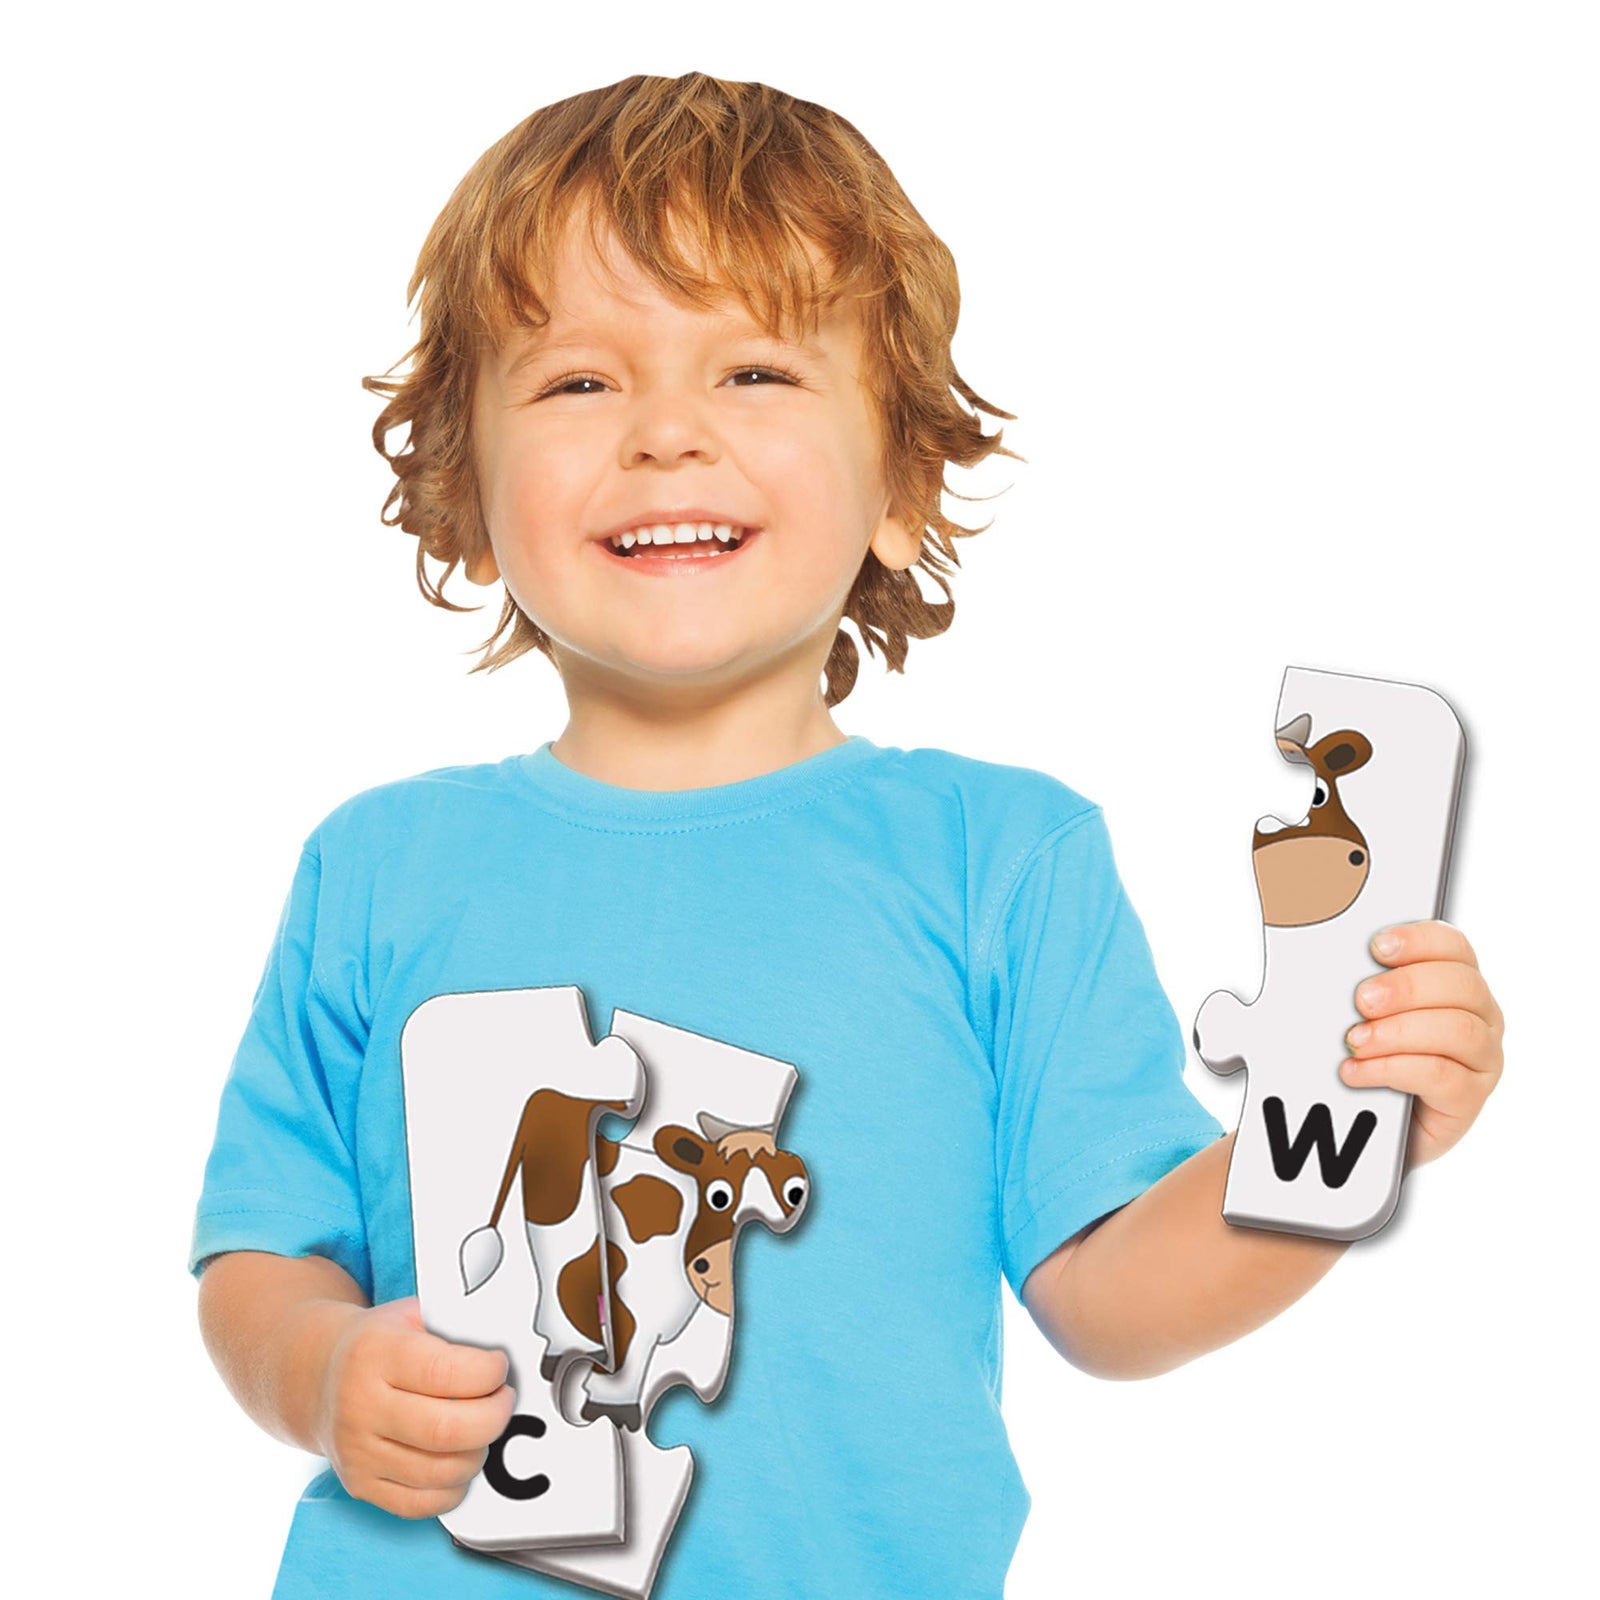 The Learning Journey: Match It! - Spelling - 20 Piece Self-Correcting Spelling Puzzle for Three and Four Letter Words with Matching Images - Learning Toys for 4 Year Olds - Award Winning Toys